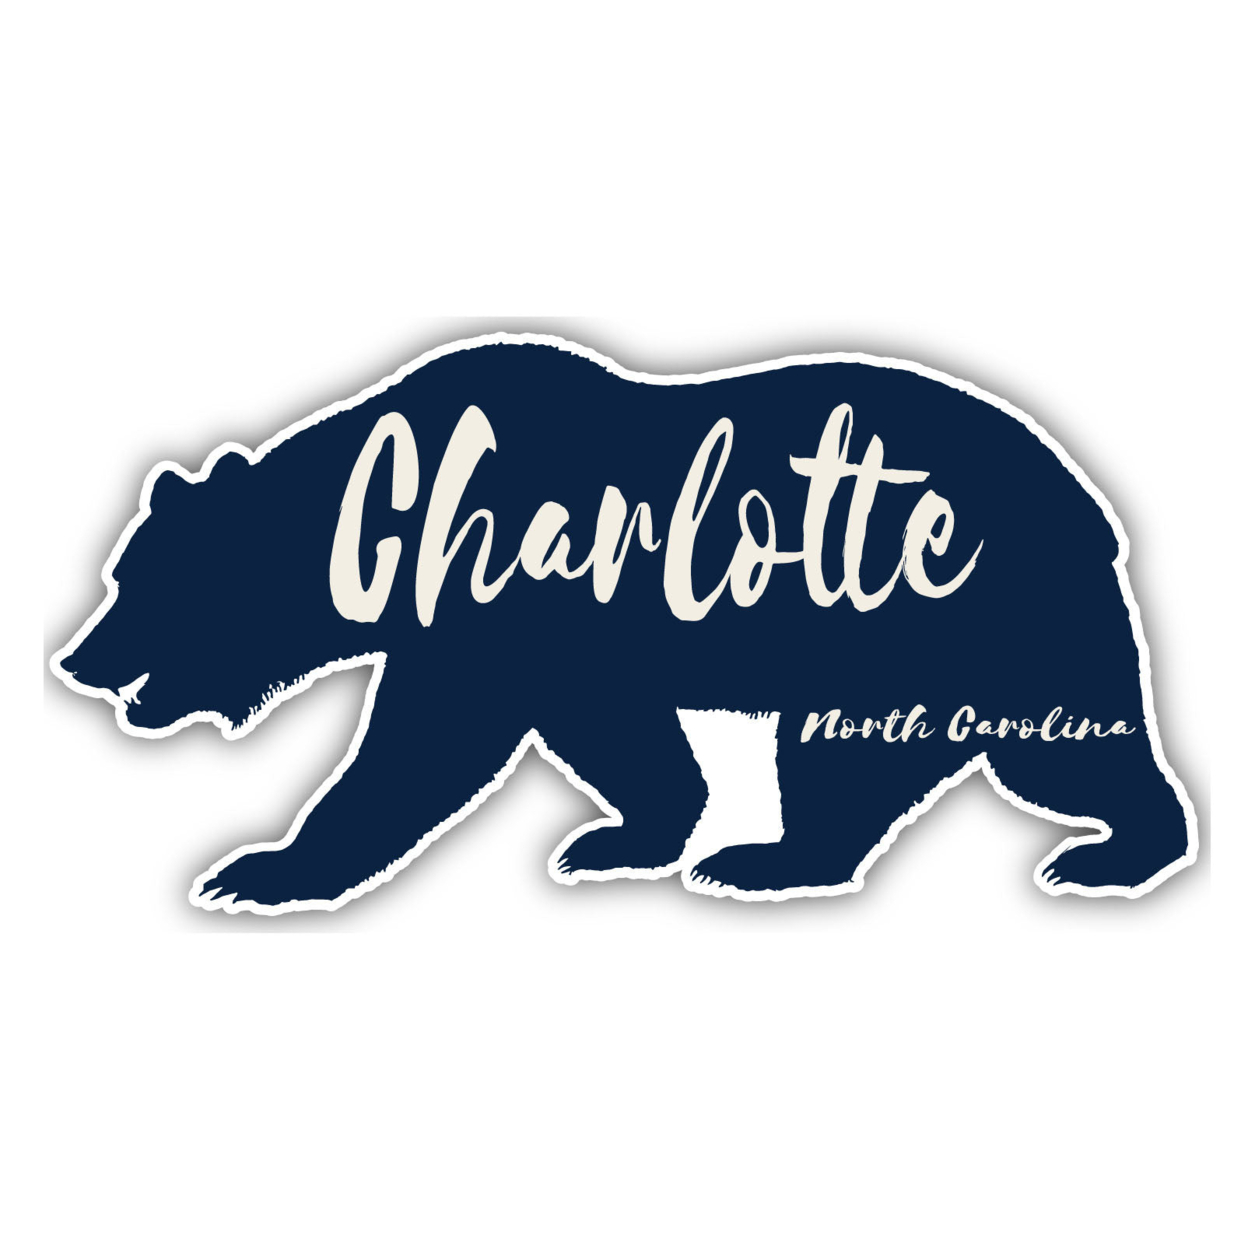 Charlotte North Carolina Souvenir Decorative Stickers (Choose Theme And Size) - Single Unit, 6-Inch, Great Outdoors